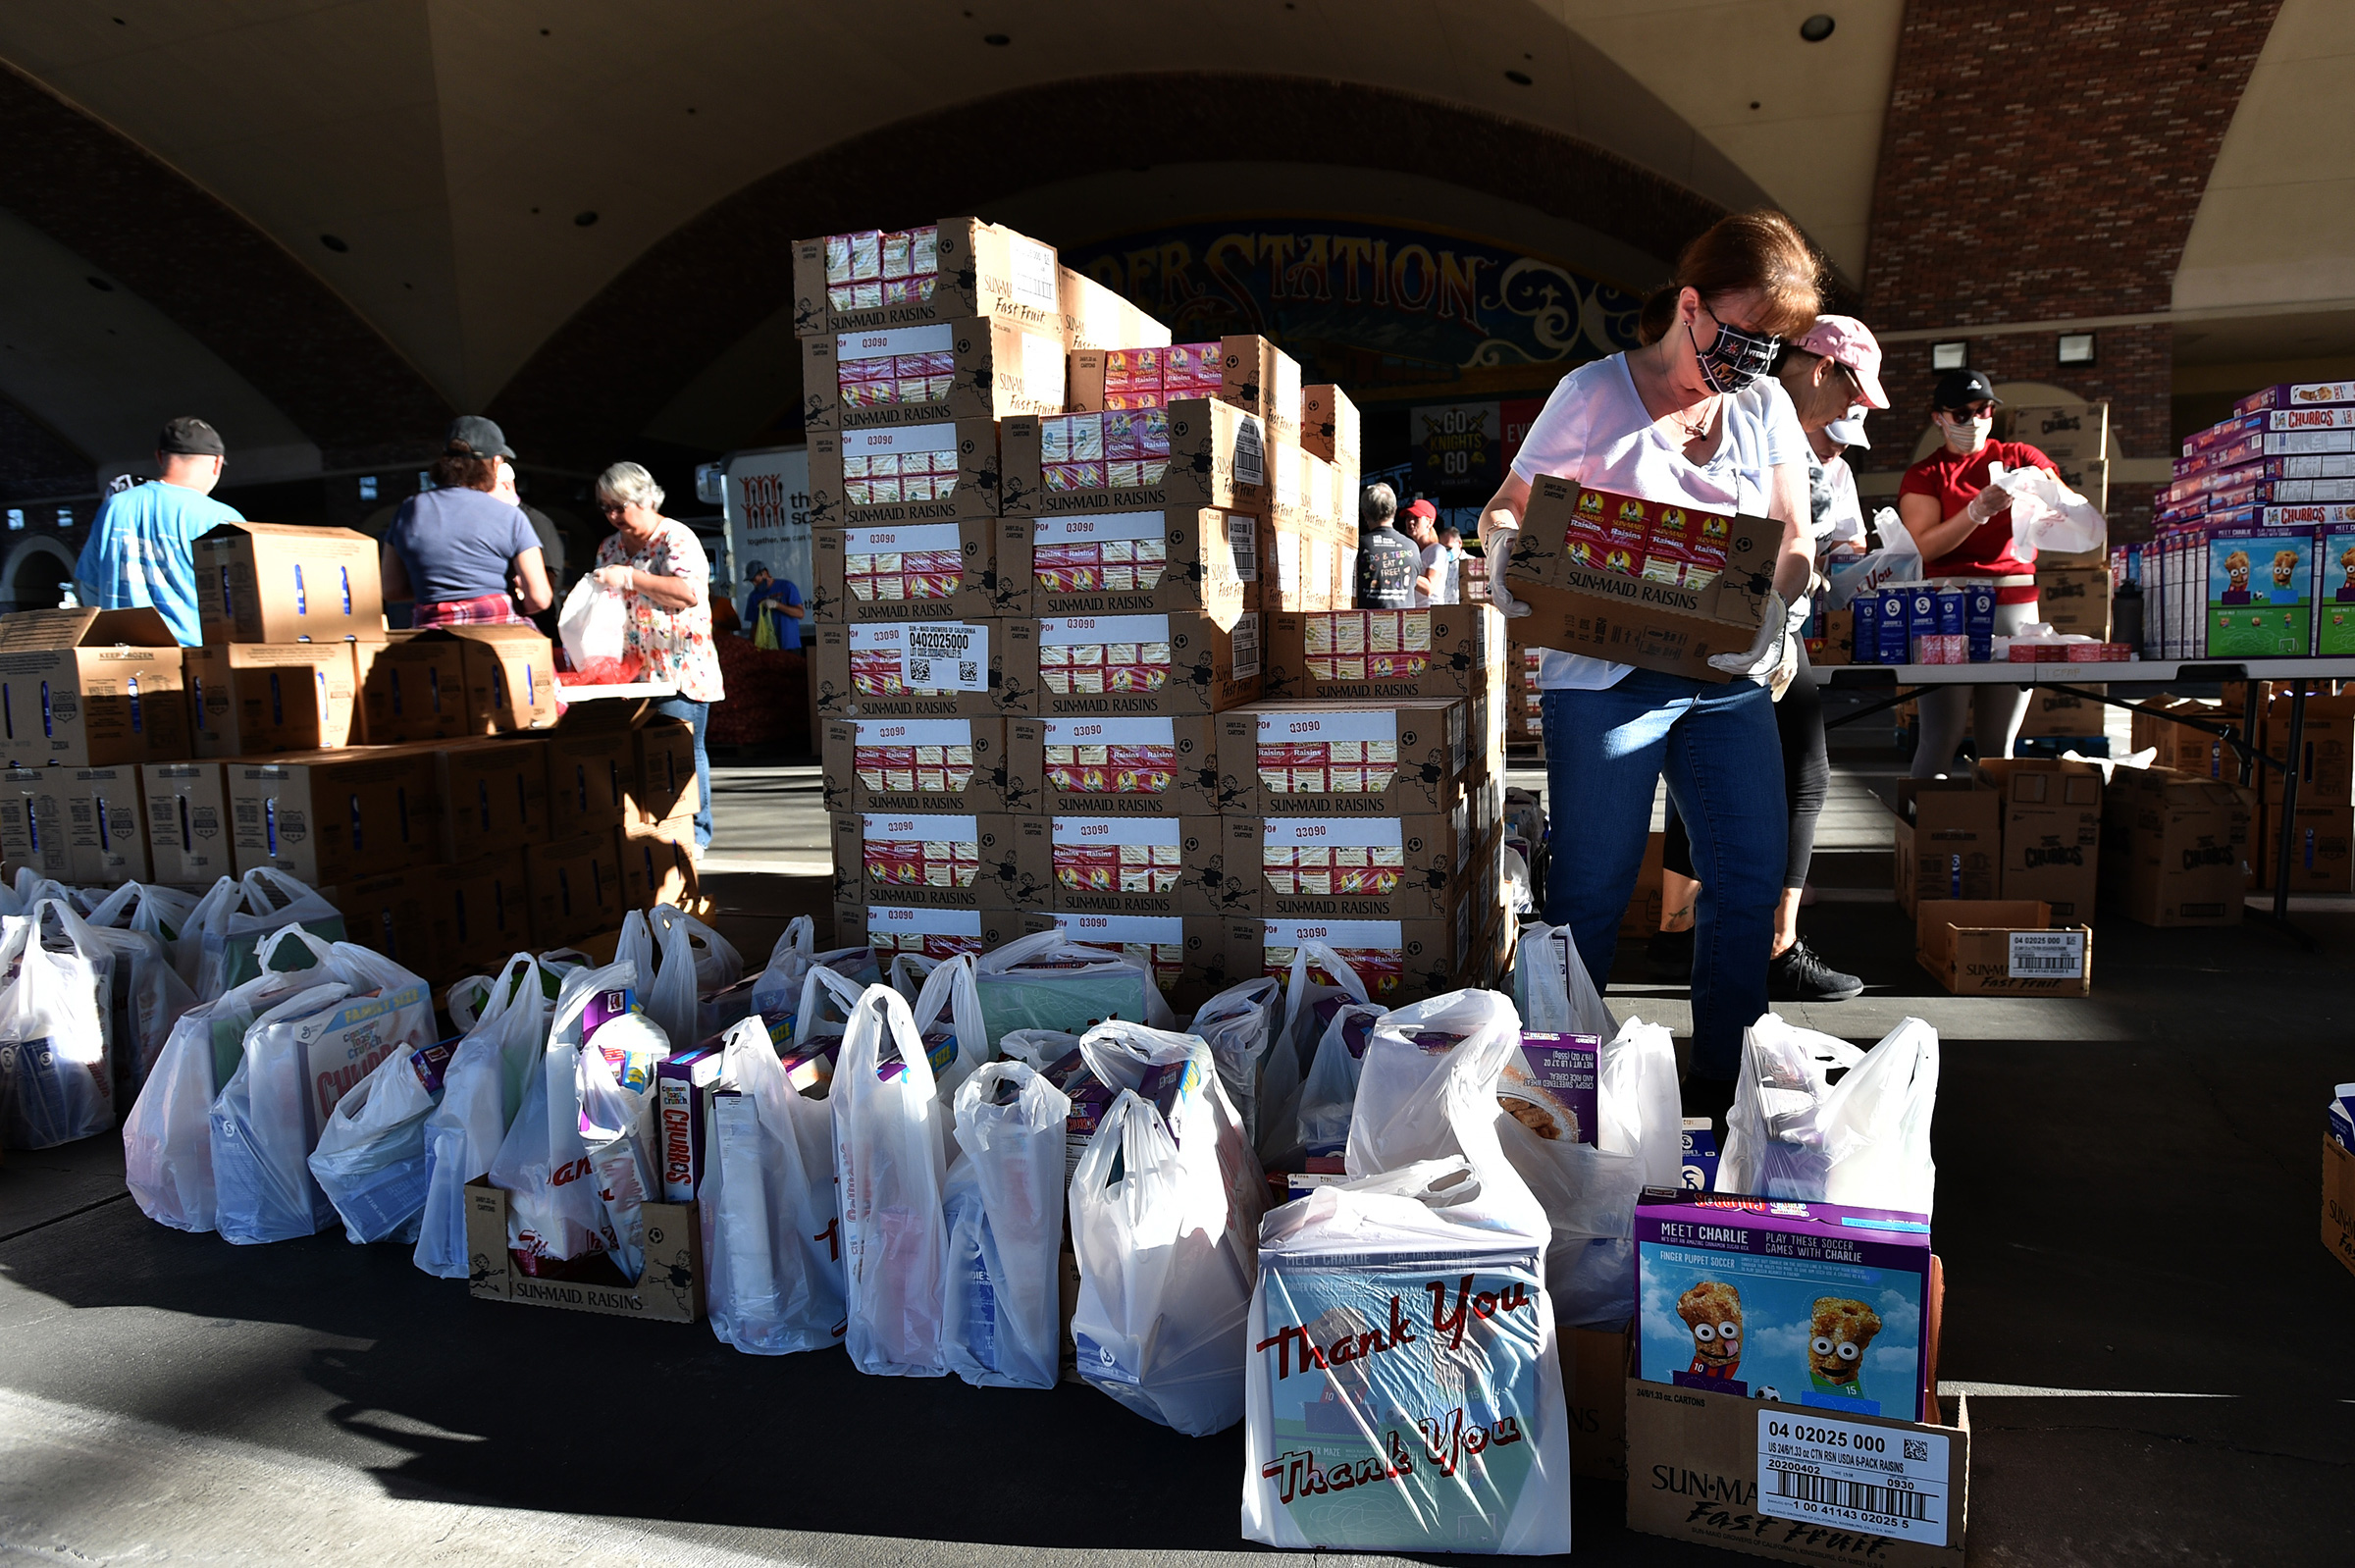 Volunteers prepare groceries to be given out at a drive-thru Three Square Food Bank emergency food distribution site at Boulder Station Hotel & Casino in response to an increase in demand amid the coronavirus pandemic on April 29 in Las Vegas. (David Becker—AFP/Getty Images)